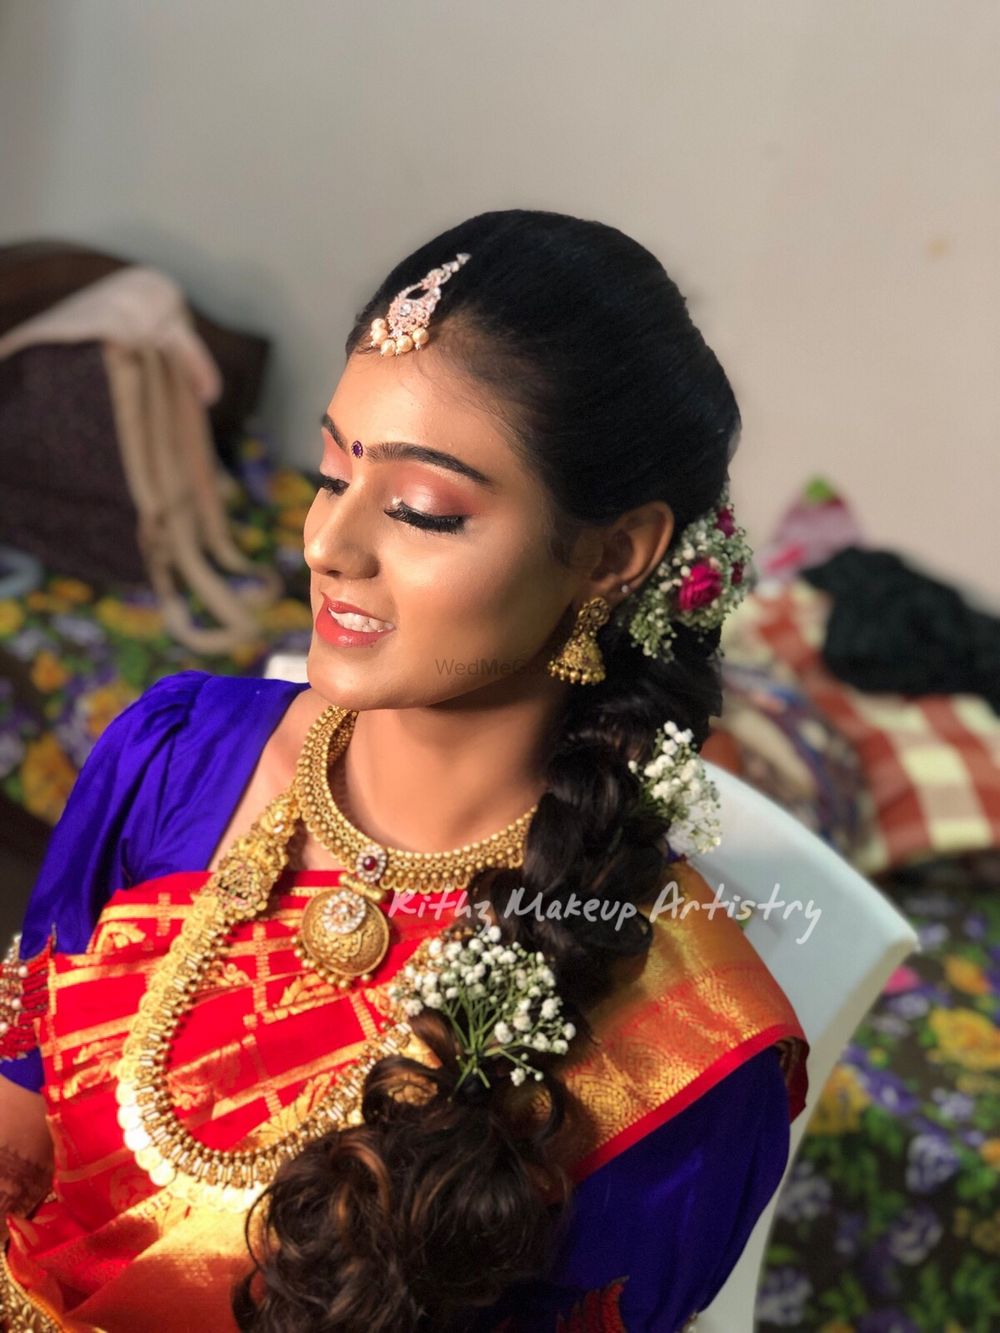 Photo From bride Harsha  - By Rithz Makeup Artistry 